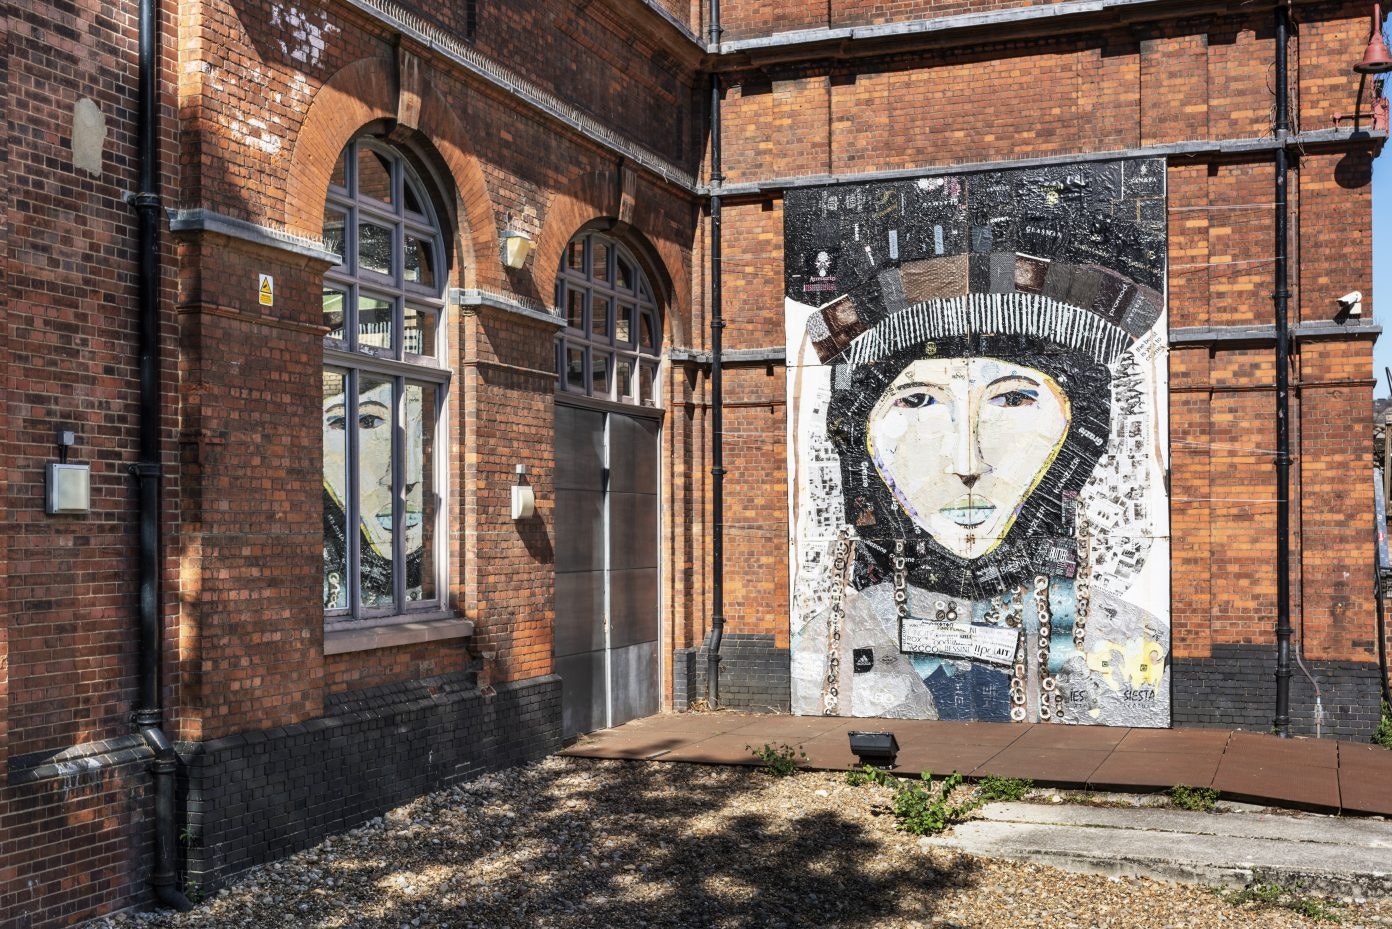 Two red brick walls, one with a large artwork depicting a face.